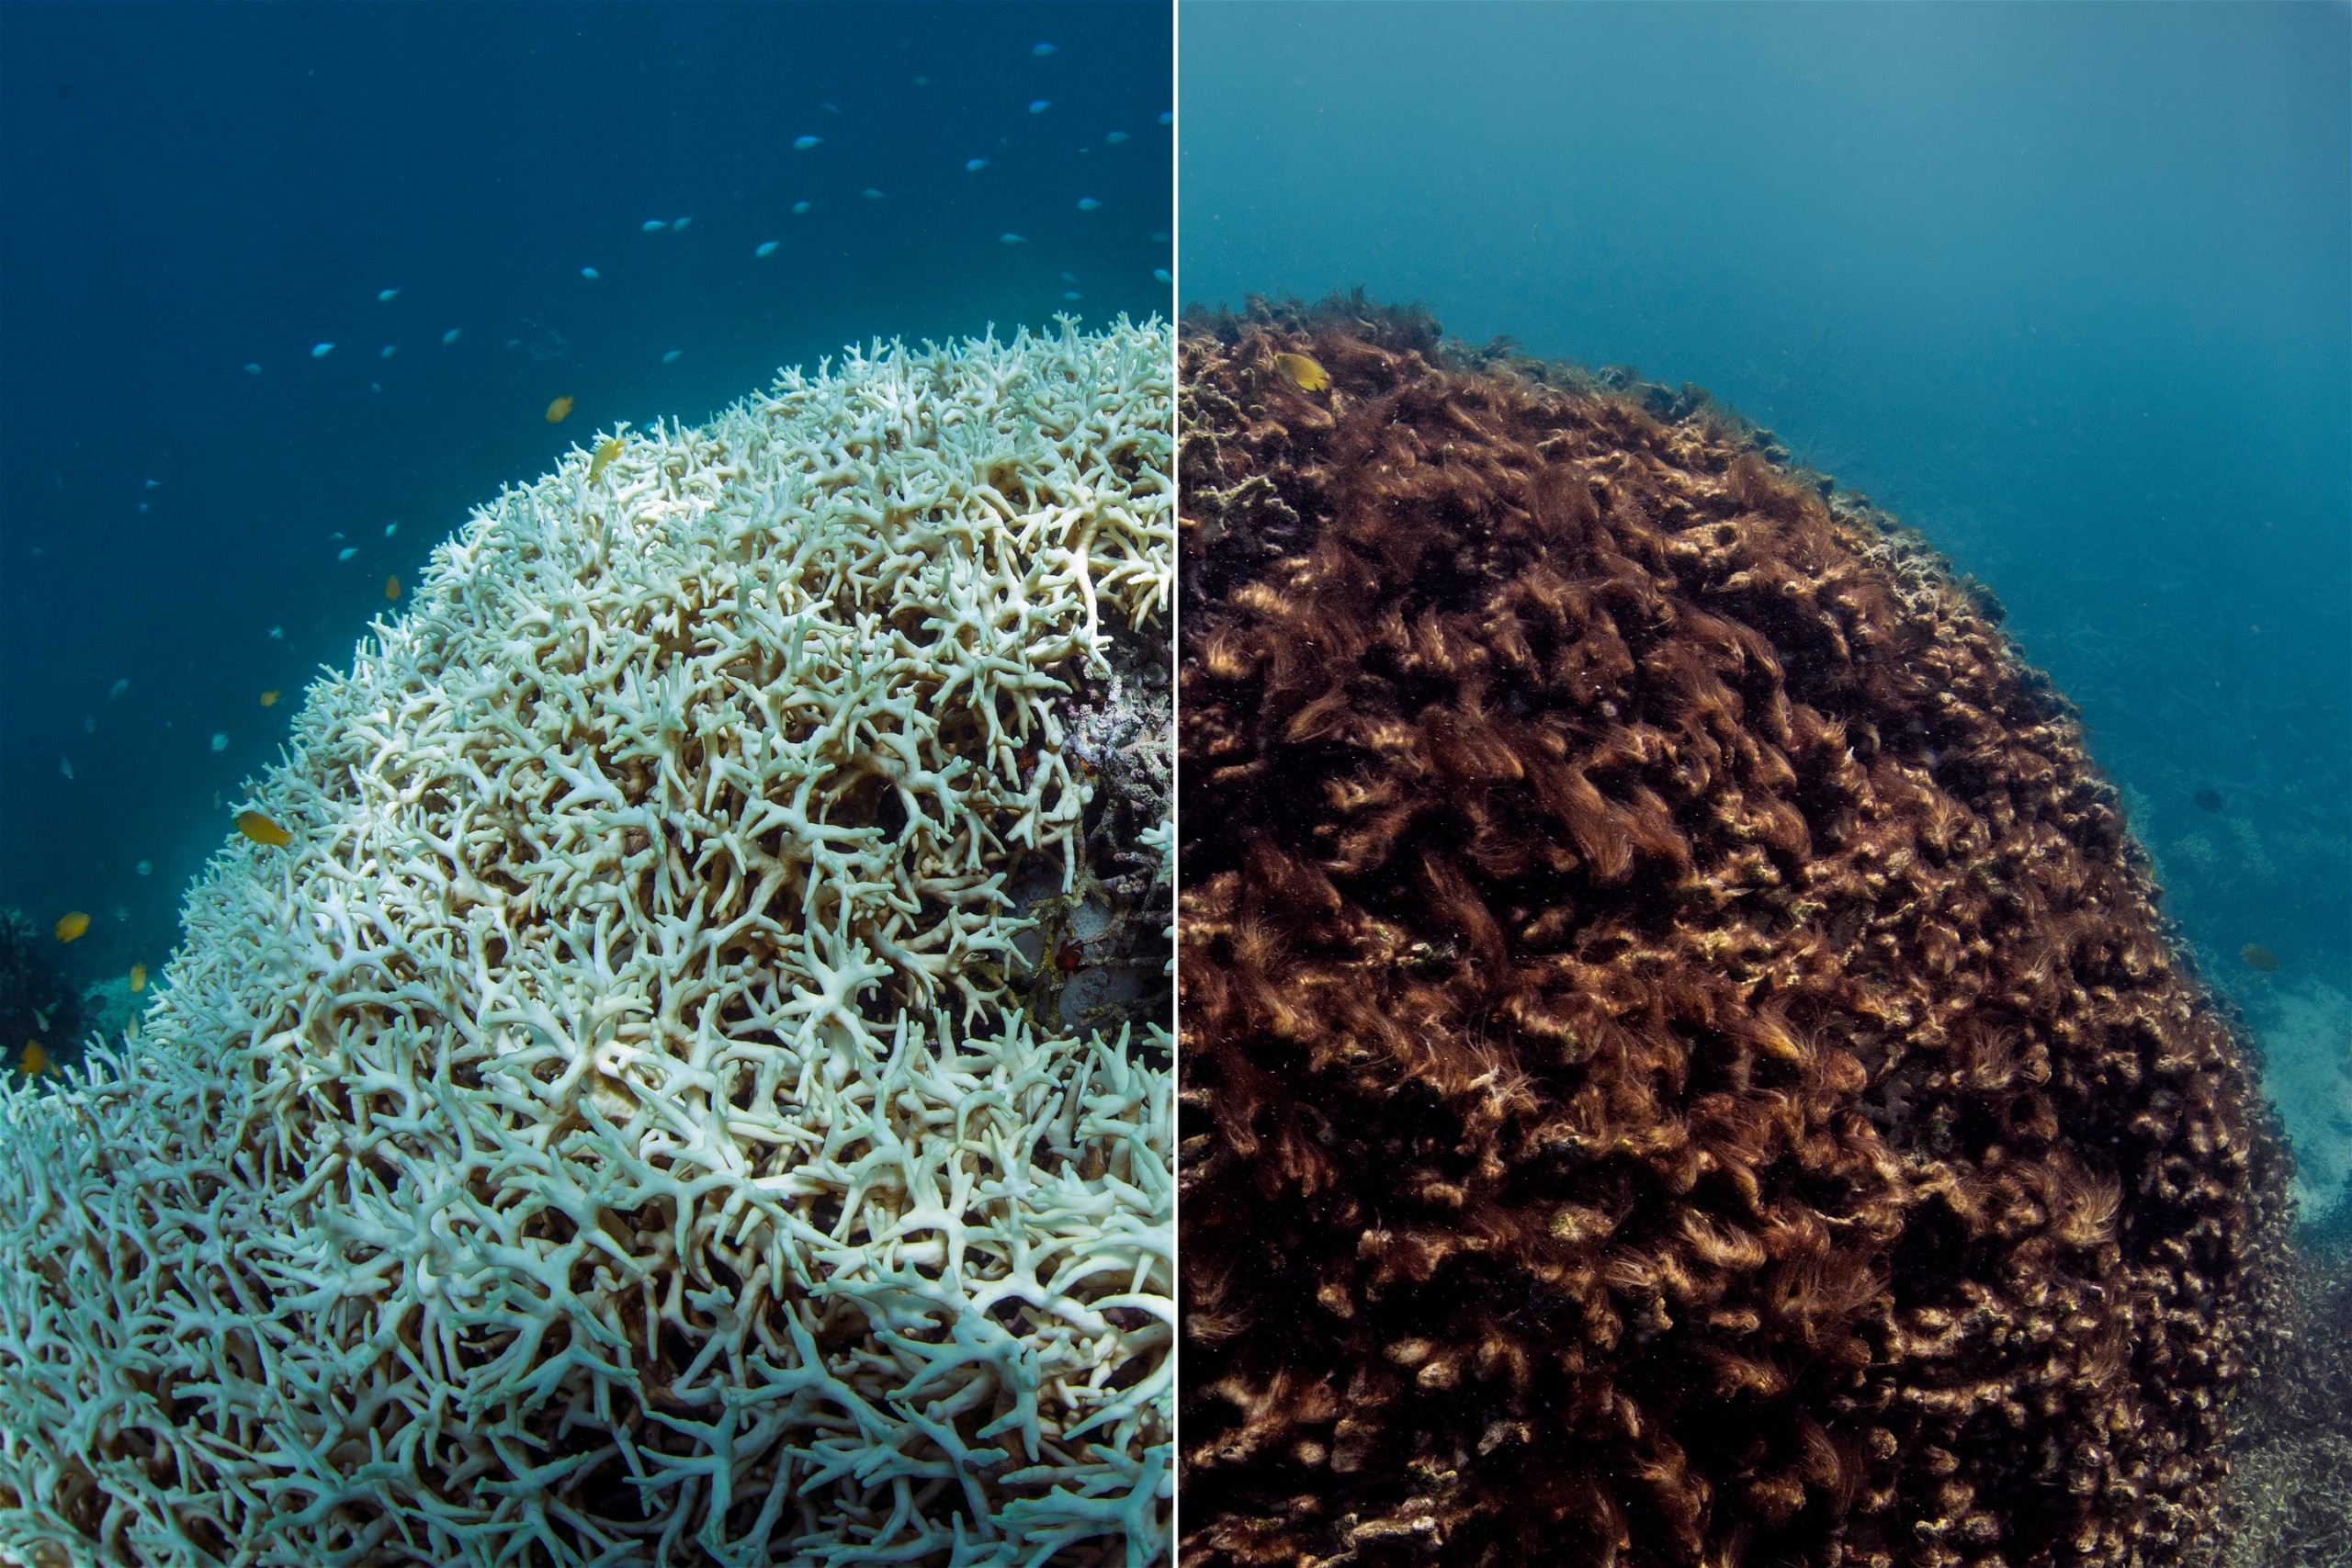 Before and After Coral Bleaching Photo by credit The Ocean Agency - XL Catlin Seaview Survey - Richard Vevers _ Christophe Bailhache.